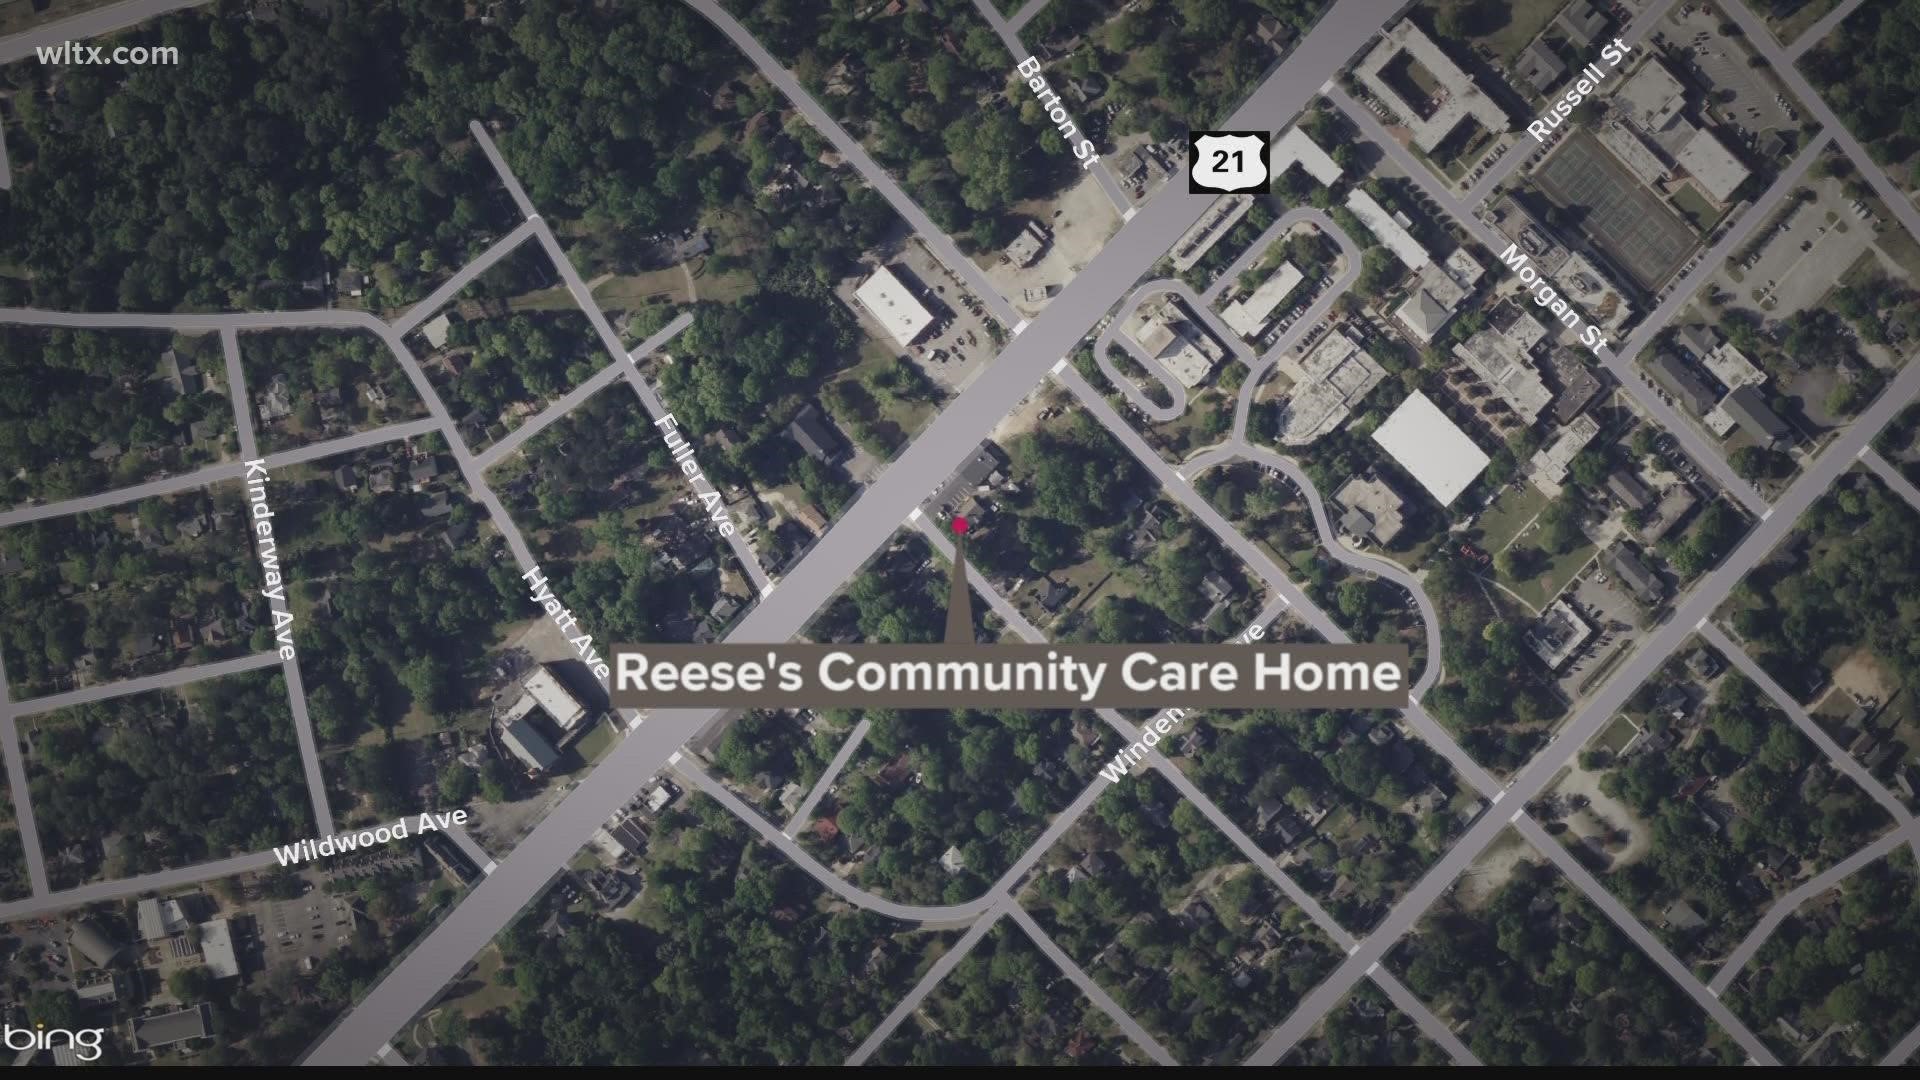 Two Reese's Community care homes in Columbia were issued emergency suspension notices on an emergency basis.